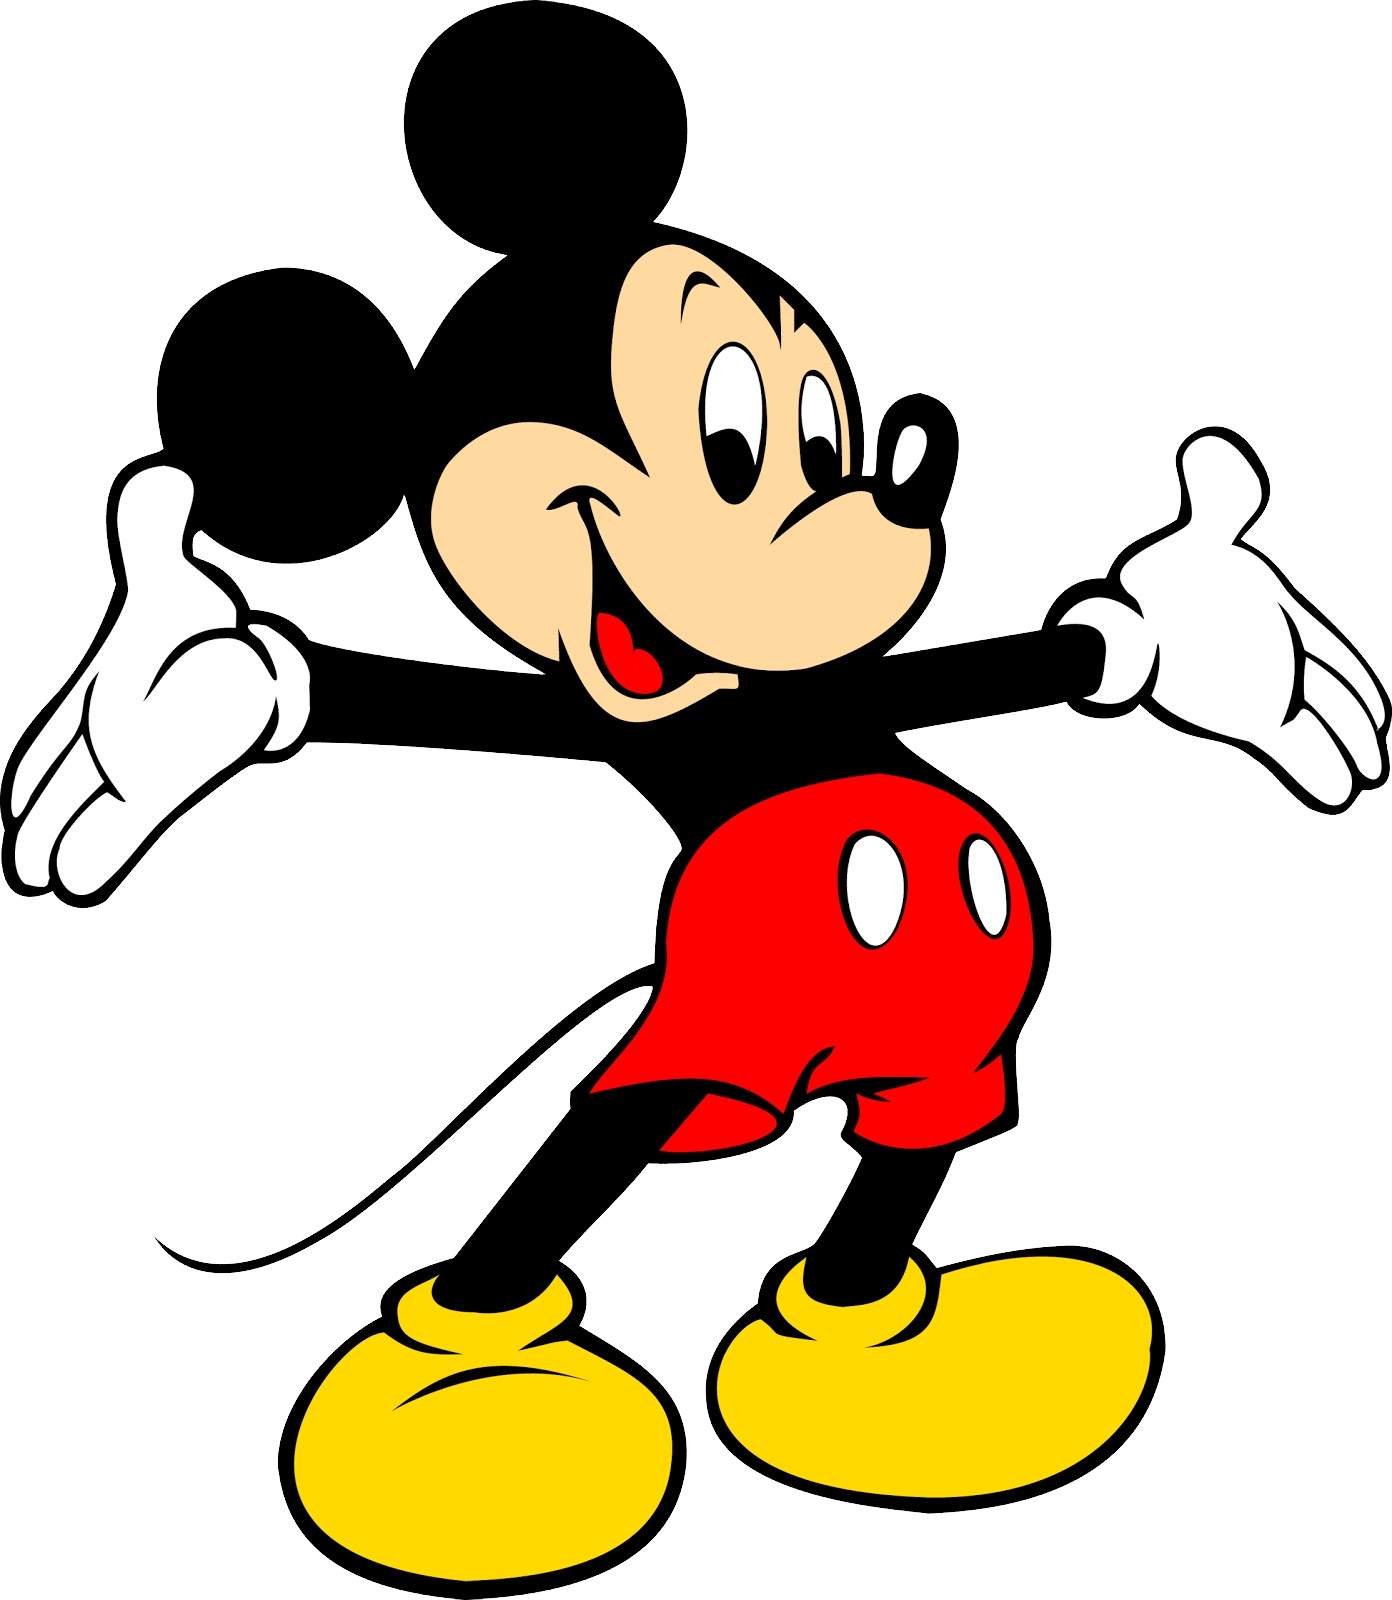 Mickey Mouse PNG transparent image download, size: 1534x1600px